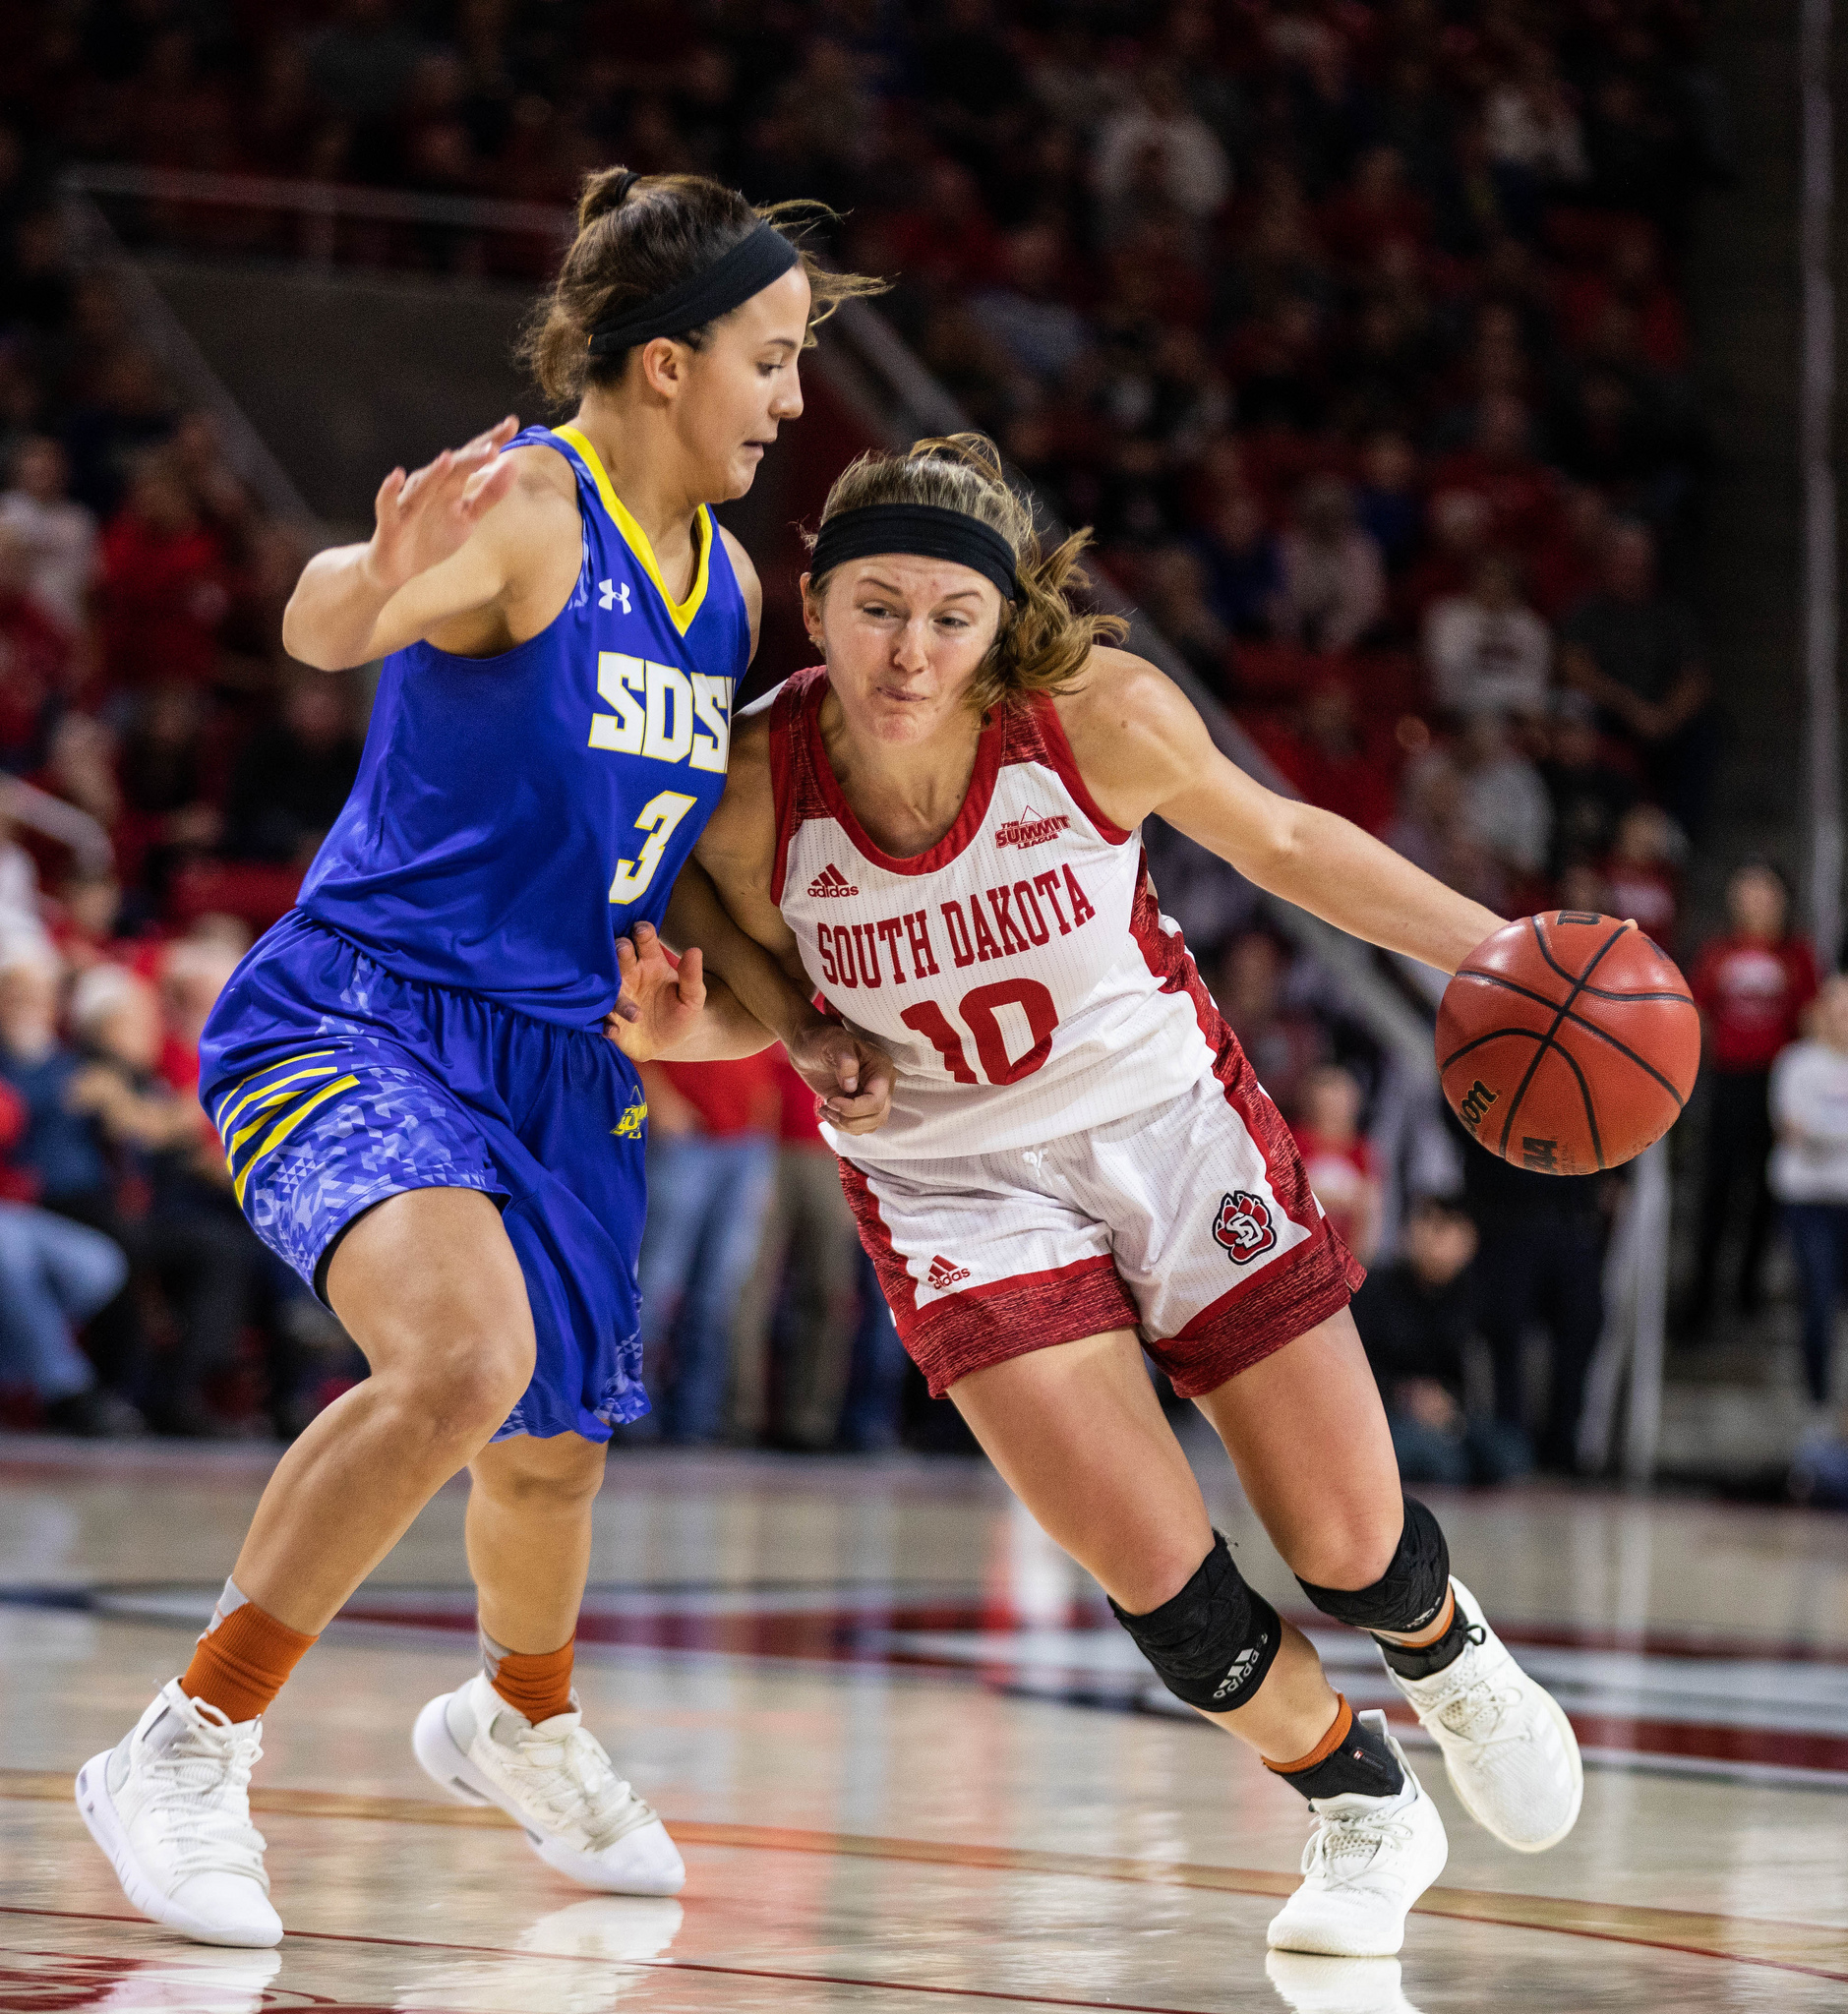 Coyotes hold on for double overtime thriller, tops SDSU 105-98